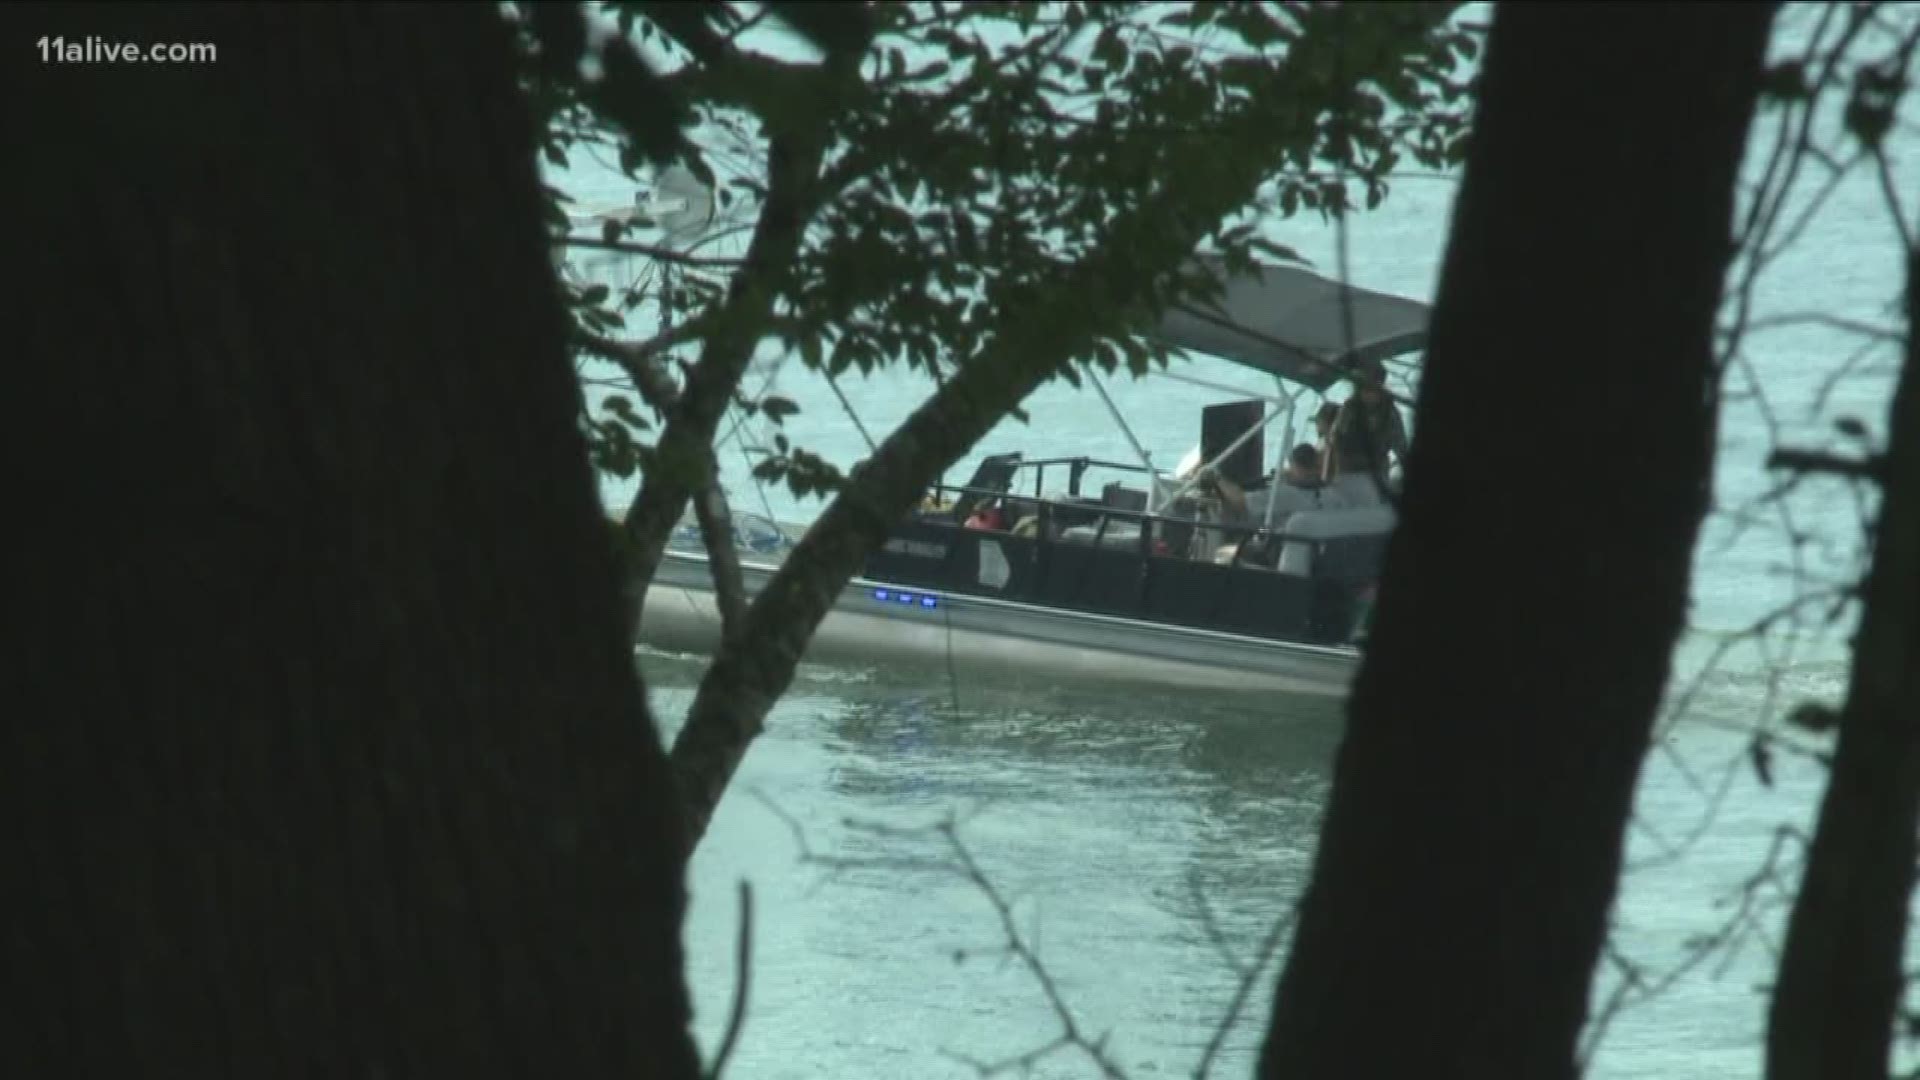 Search crews began a third day of searching early Sunday morning with sonar equipment and divers in the water.